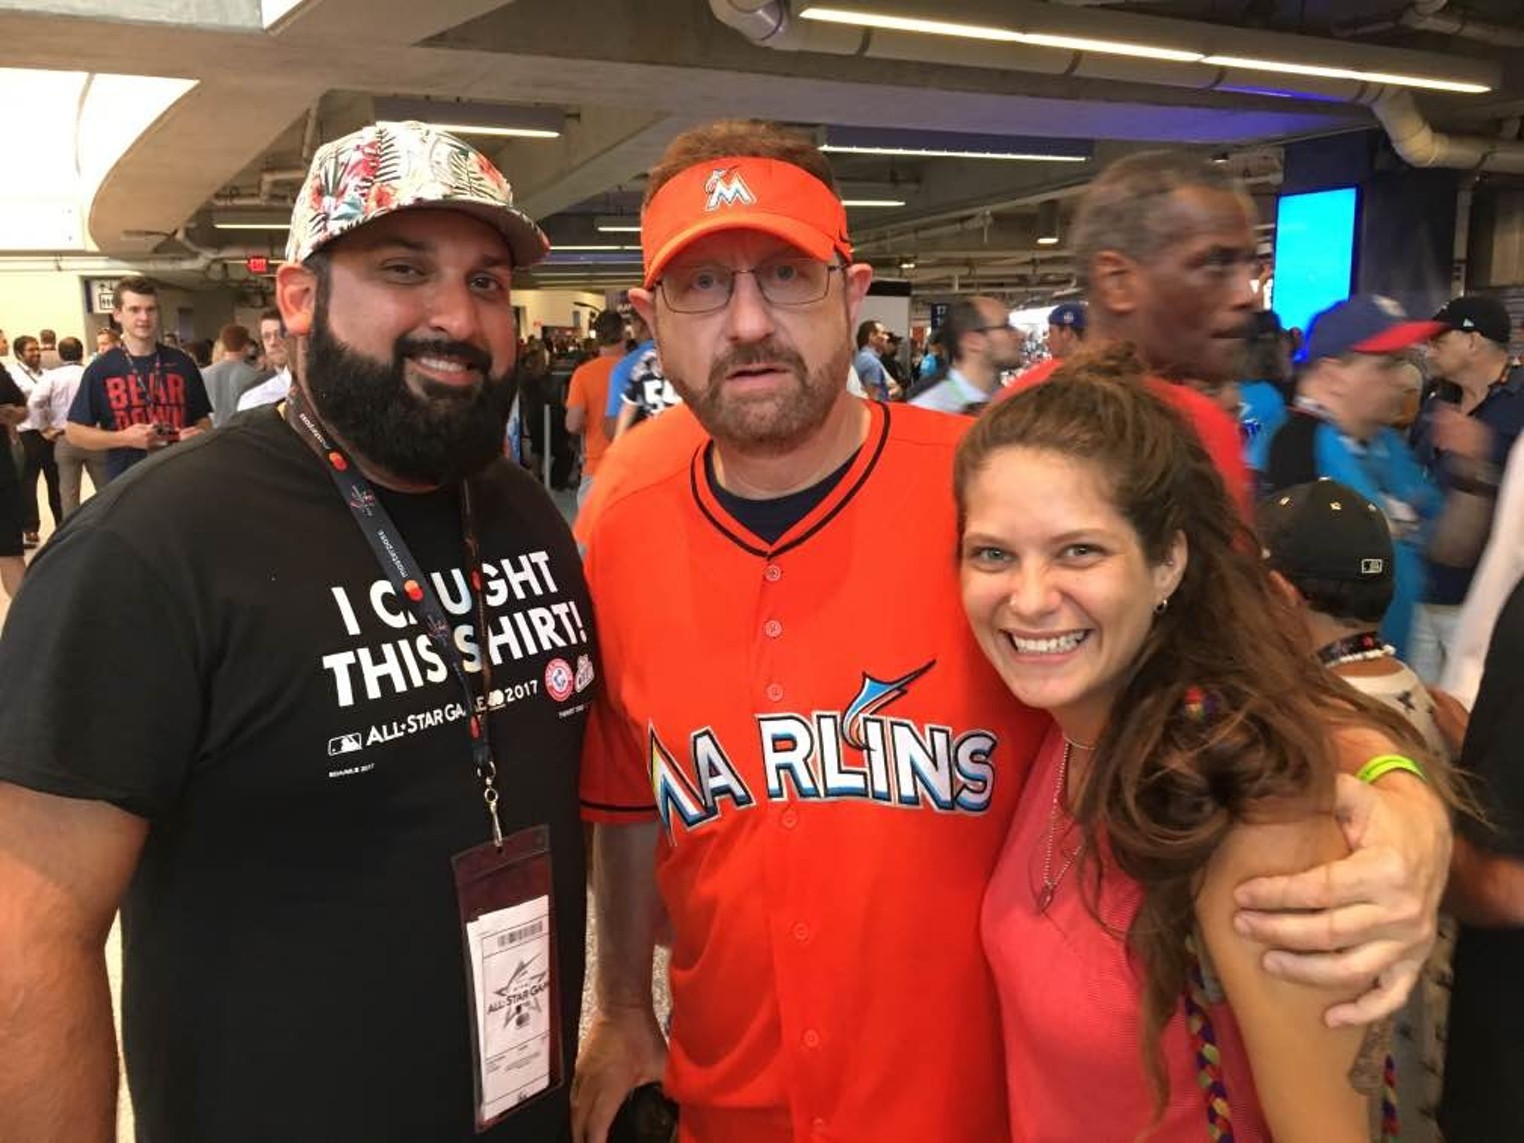 Marlins Man not going to Miami games, looks for new team - Sports